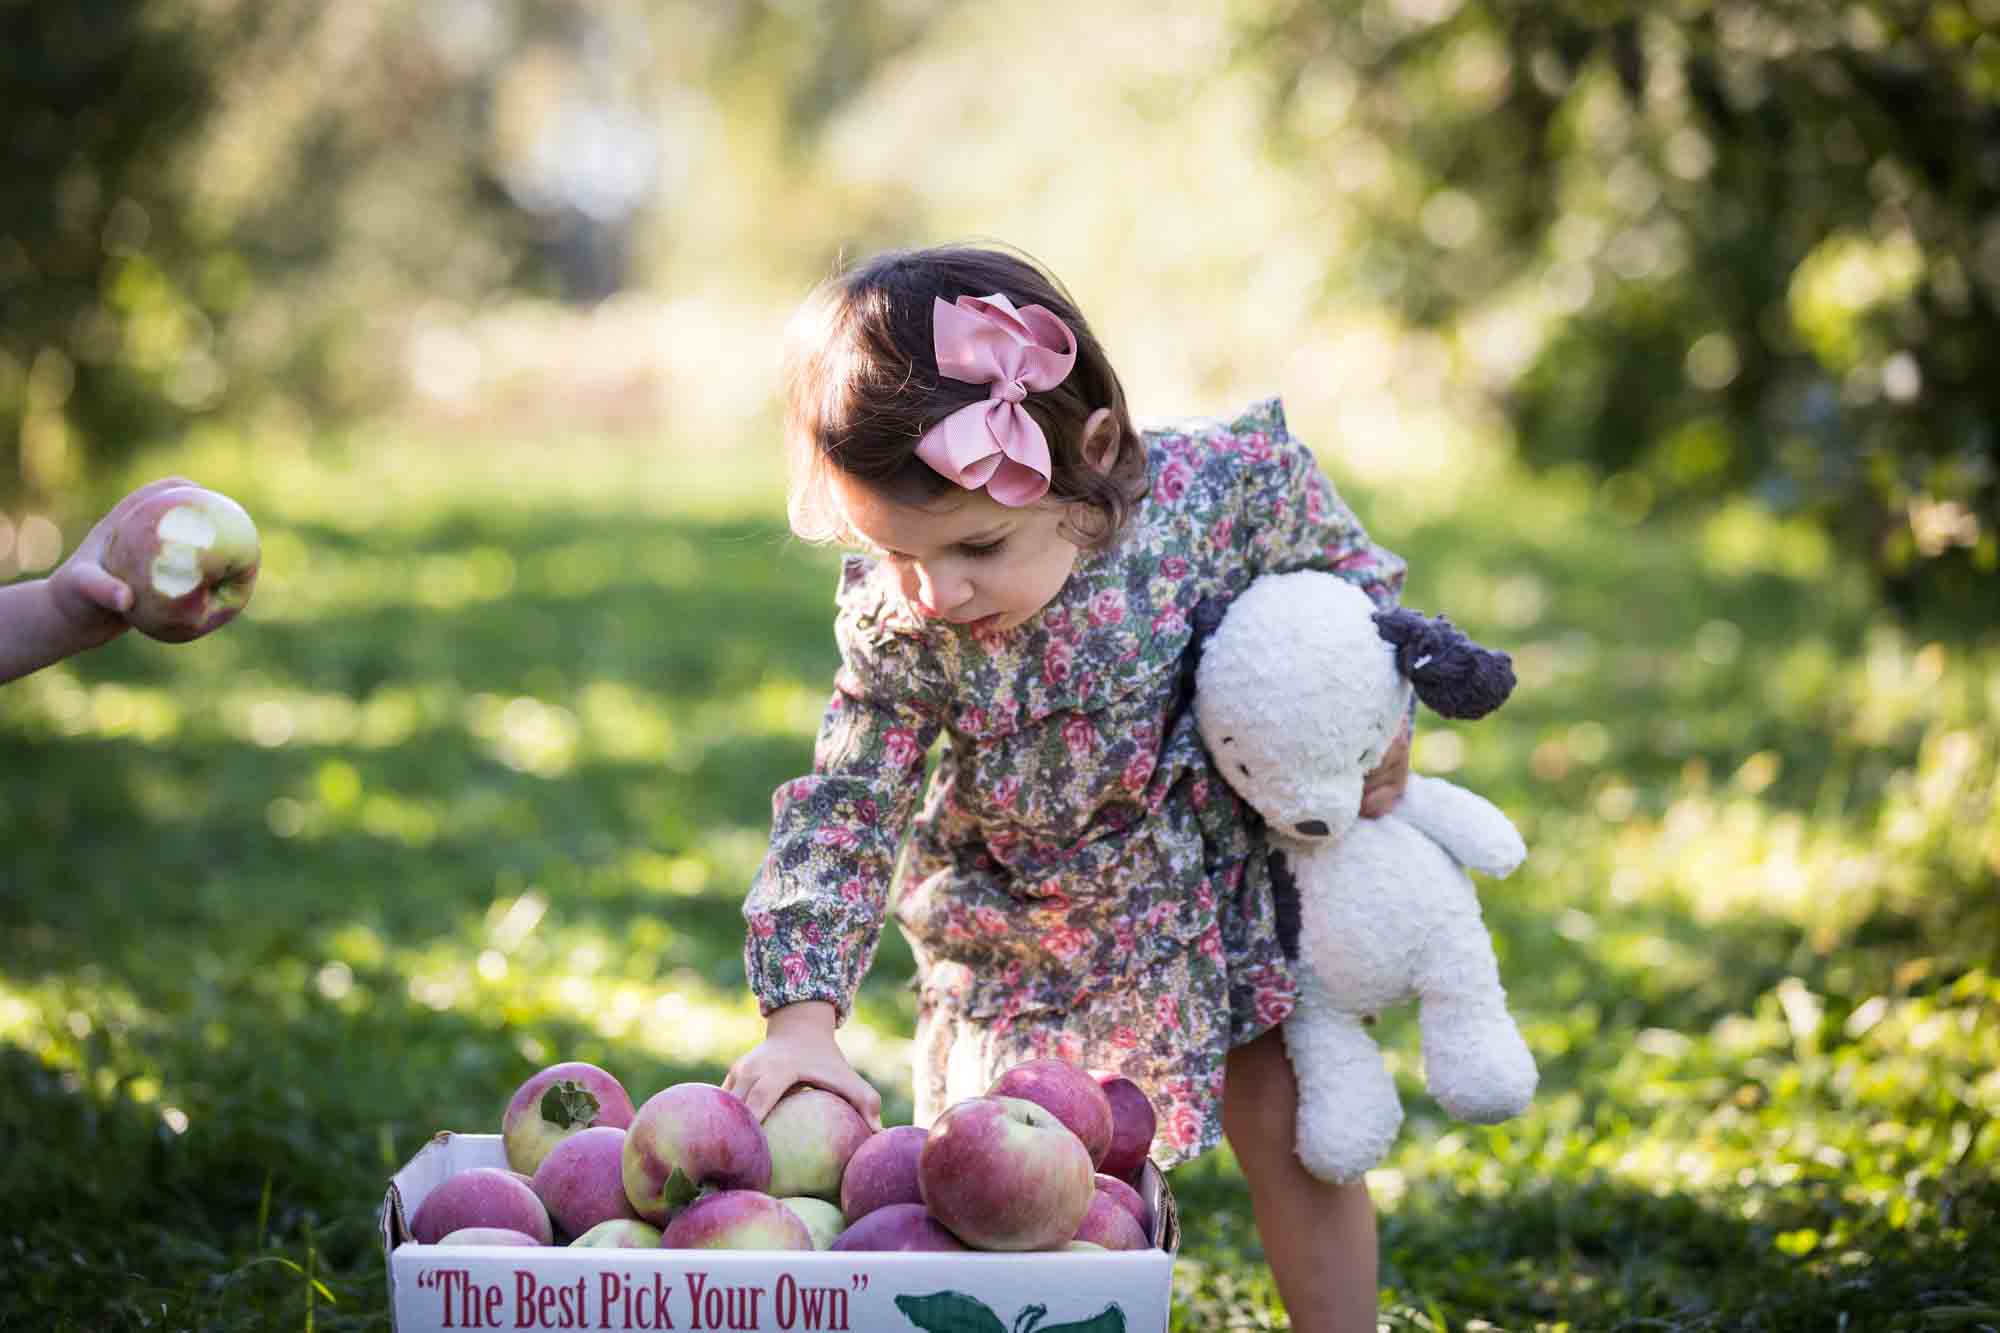 Little girl grabbing apple from pile for an article on tips for apple picking family photos